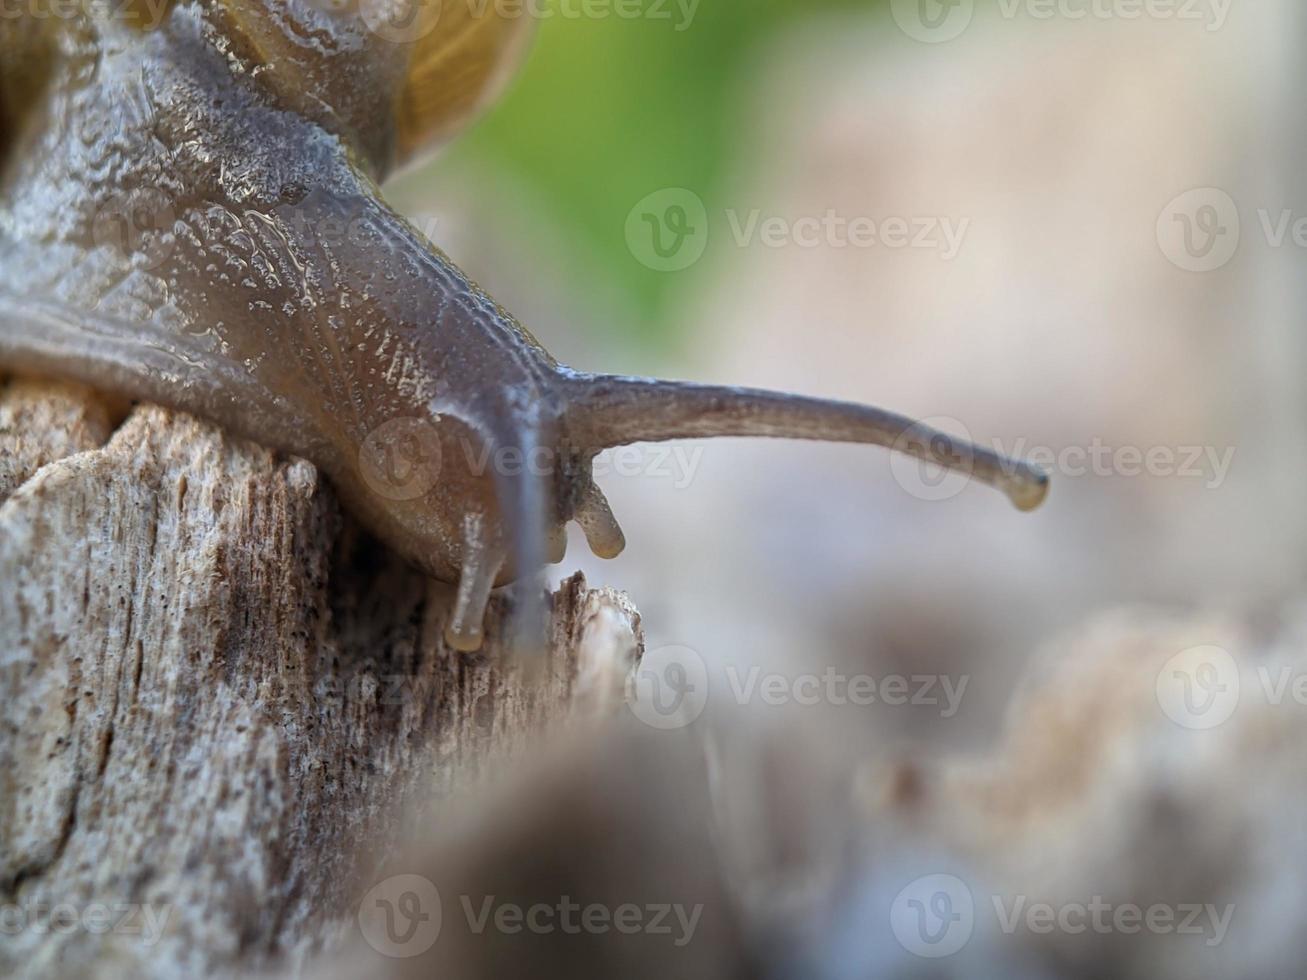 Snail on the wood, in the morning, macro photography, extreme close up photo